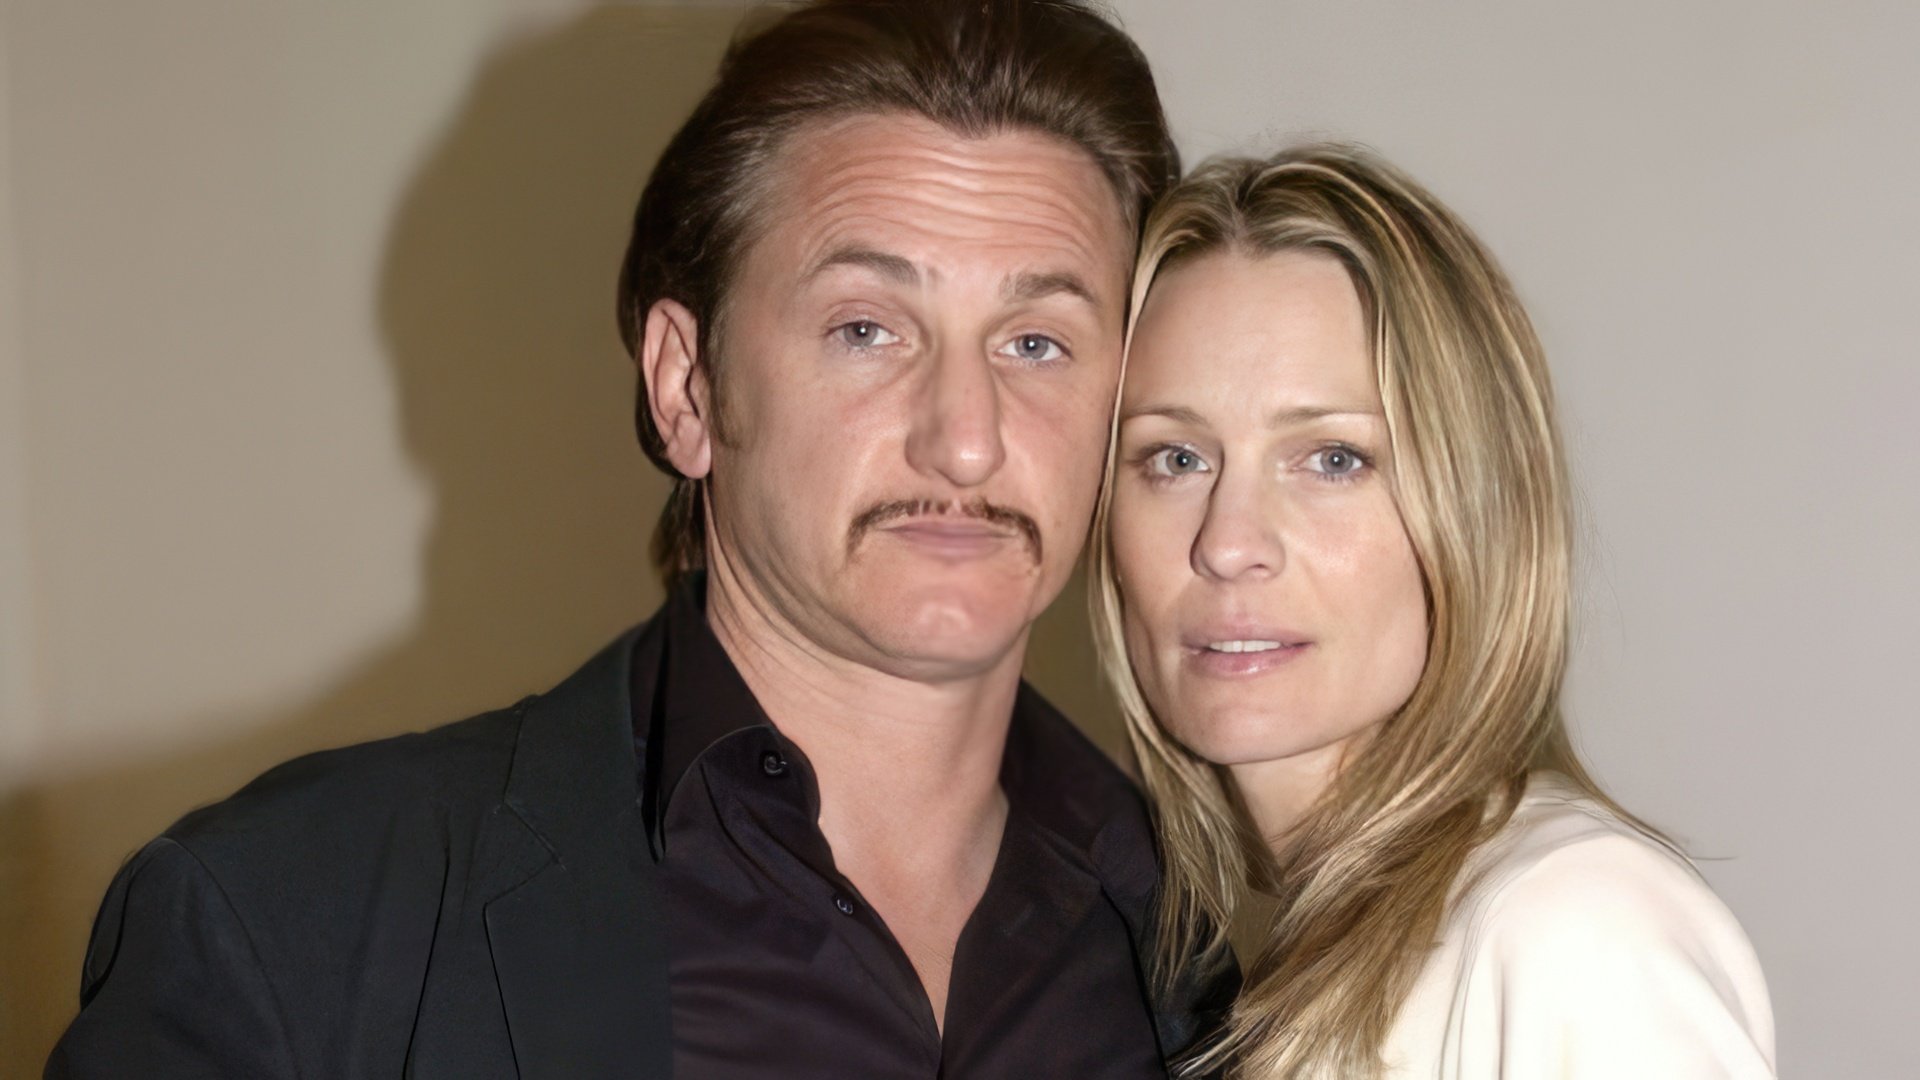 Sean Penn and Robin Wright Played in the State of Grace